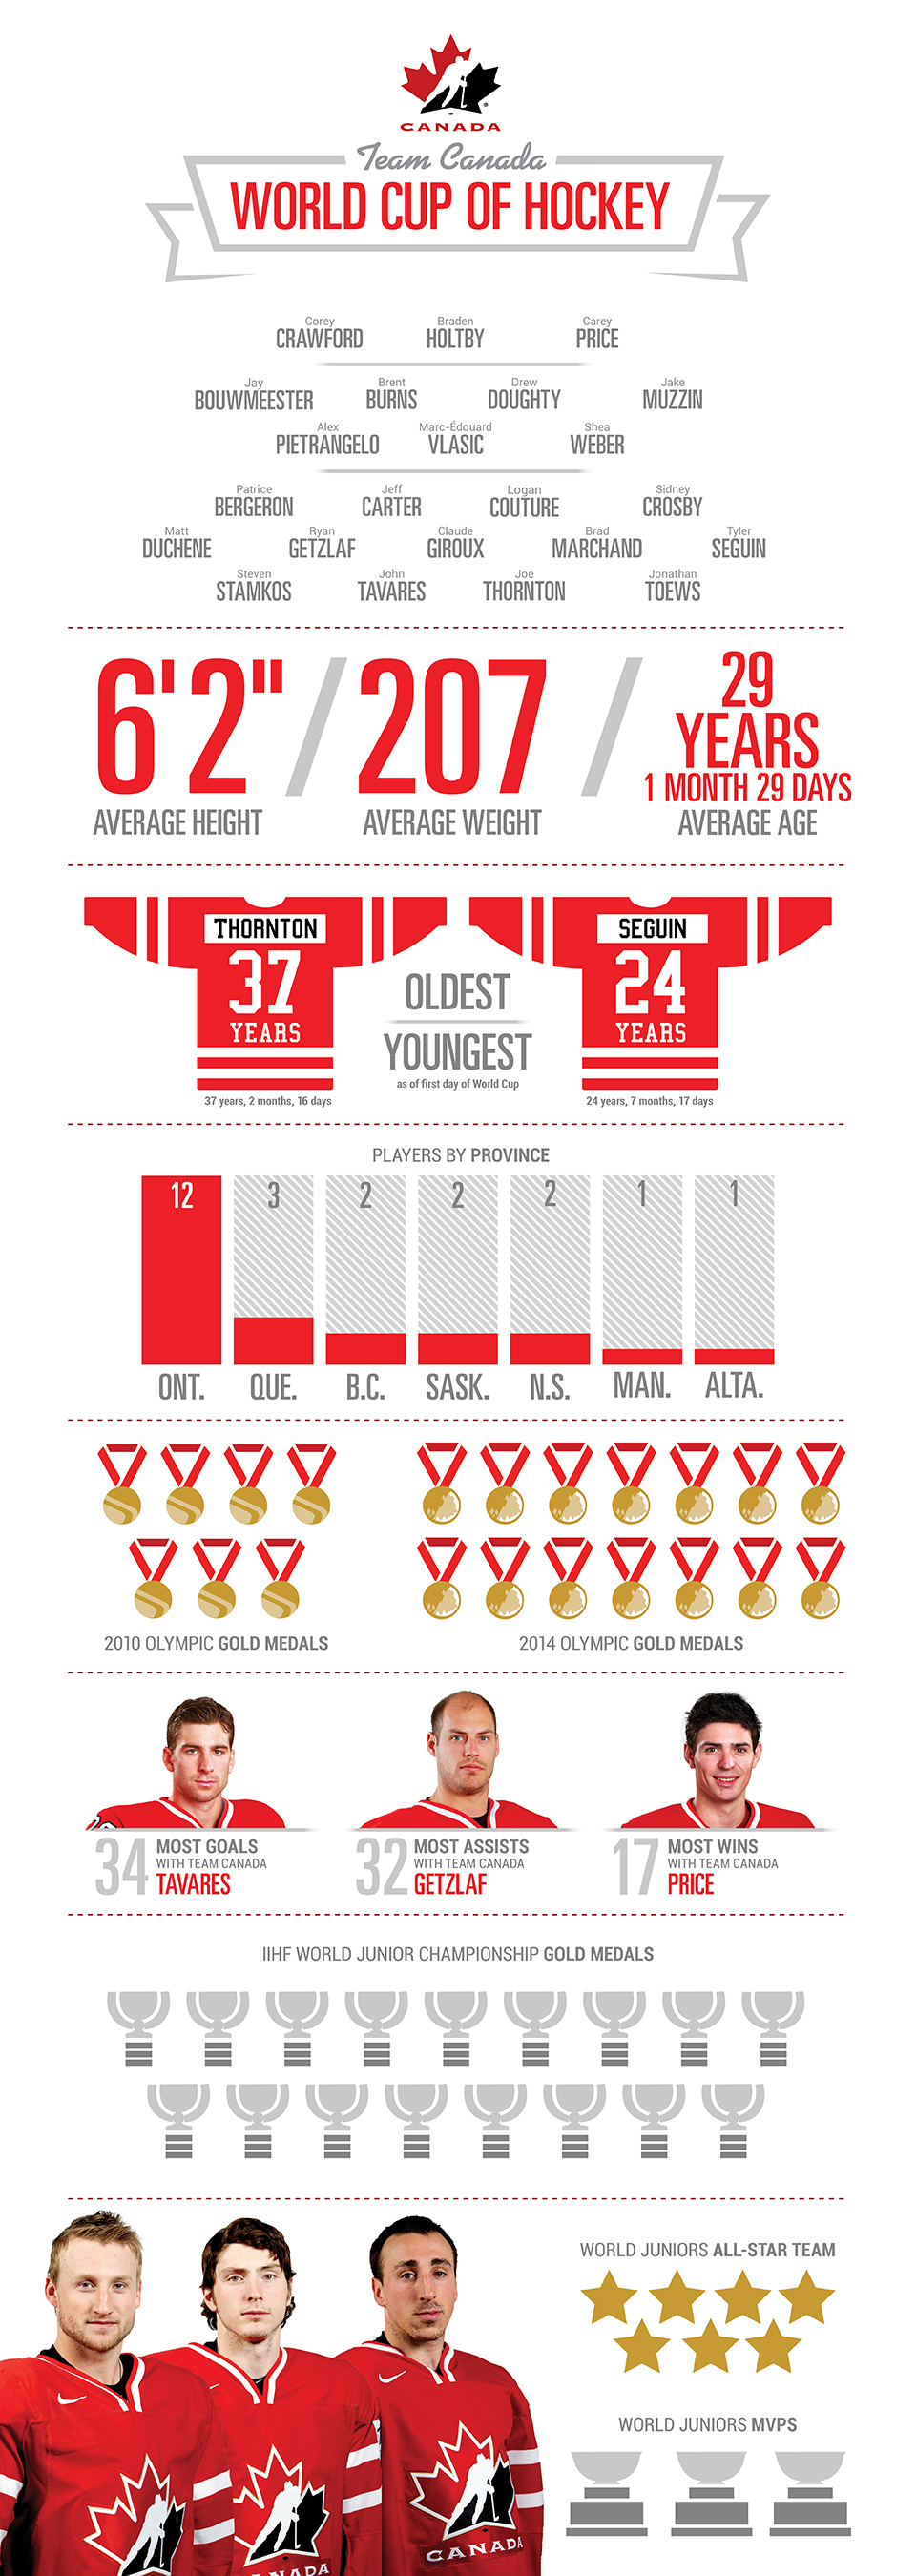 World Cup of Hockey Team Canada Infographic